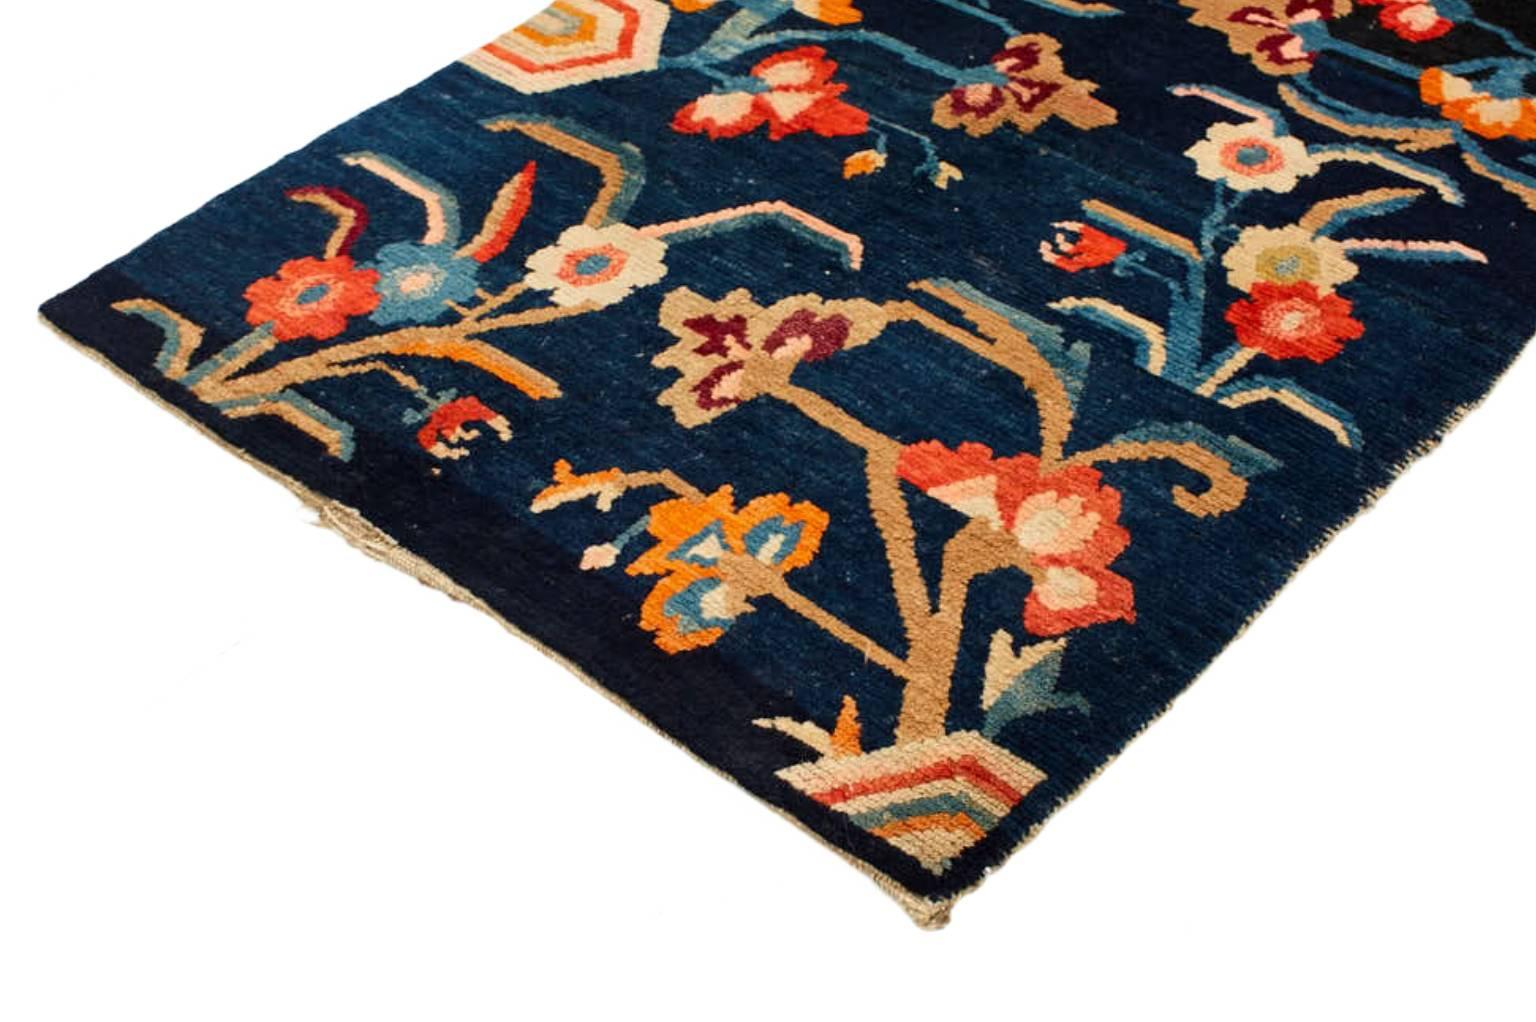 Individually selected by Madeline during her travels, this handwoven rug features floral elements that symbolize age-old Buddhist beliefs, representing purity, strength and spirituality. The distinctive palette of ivory, taupe, crimson and azure